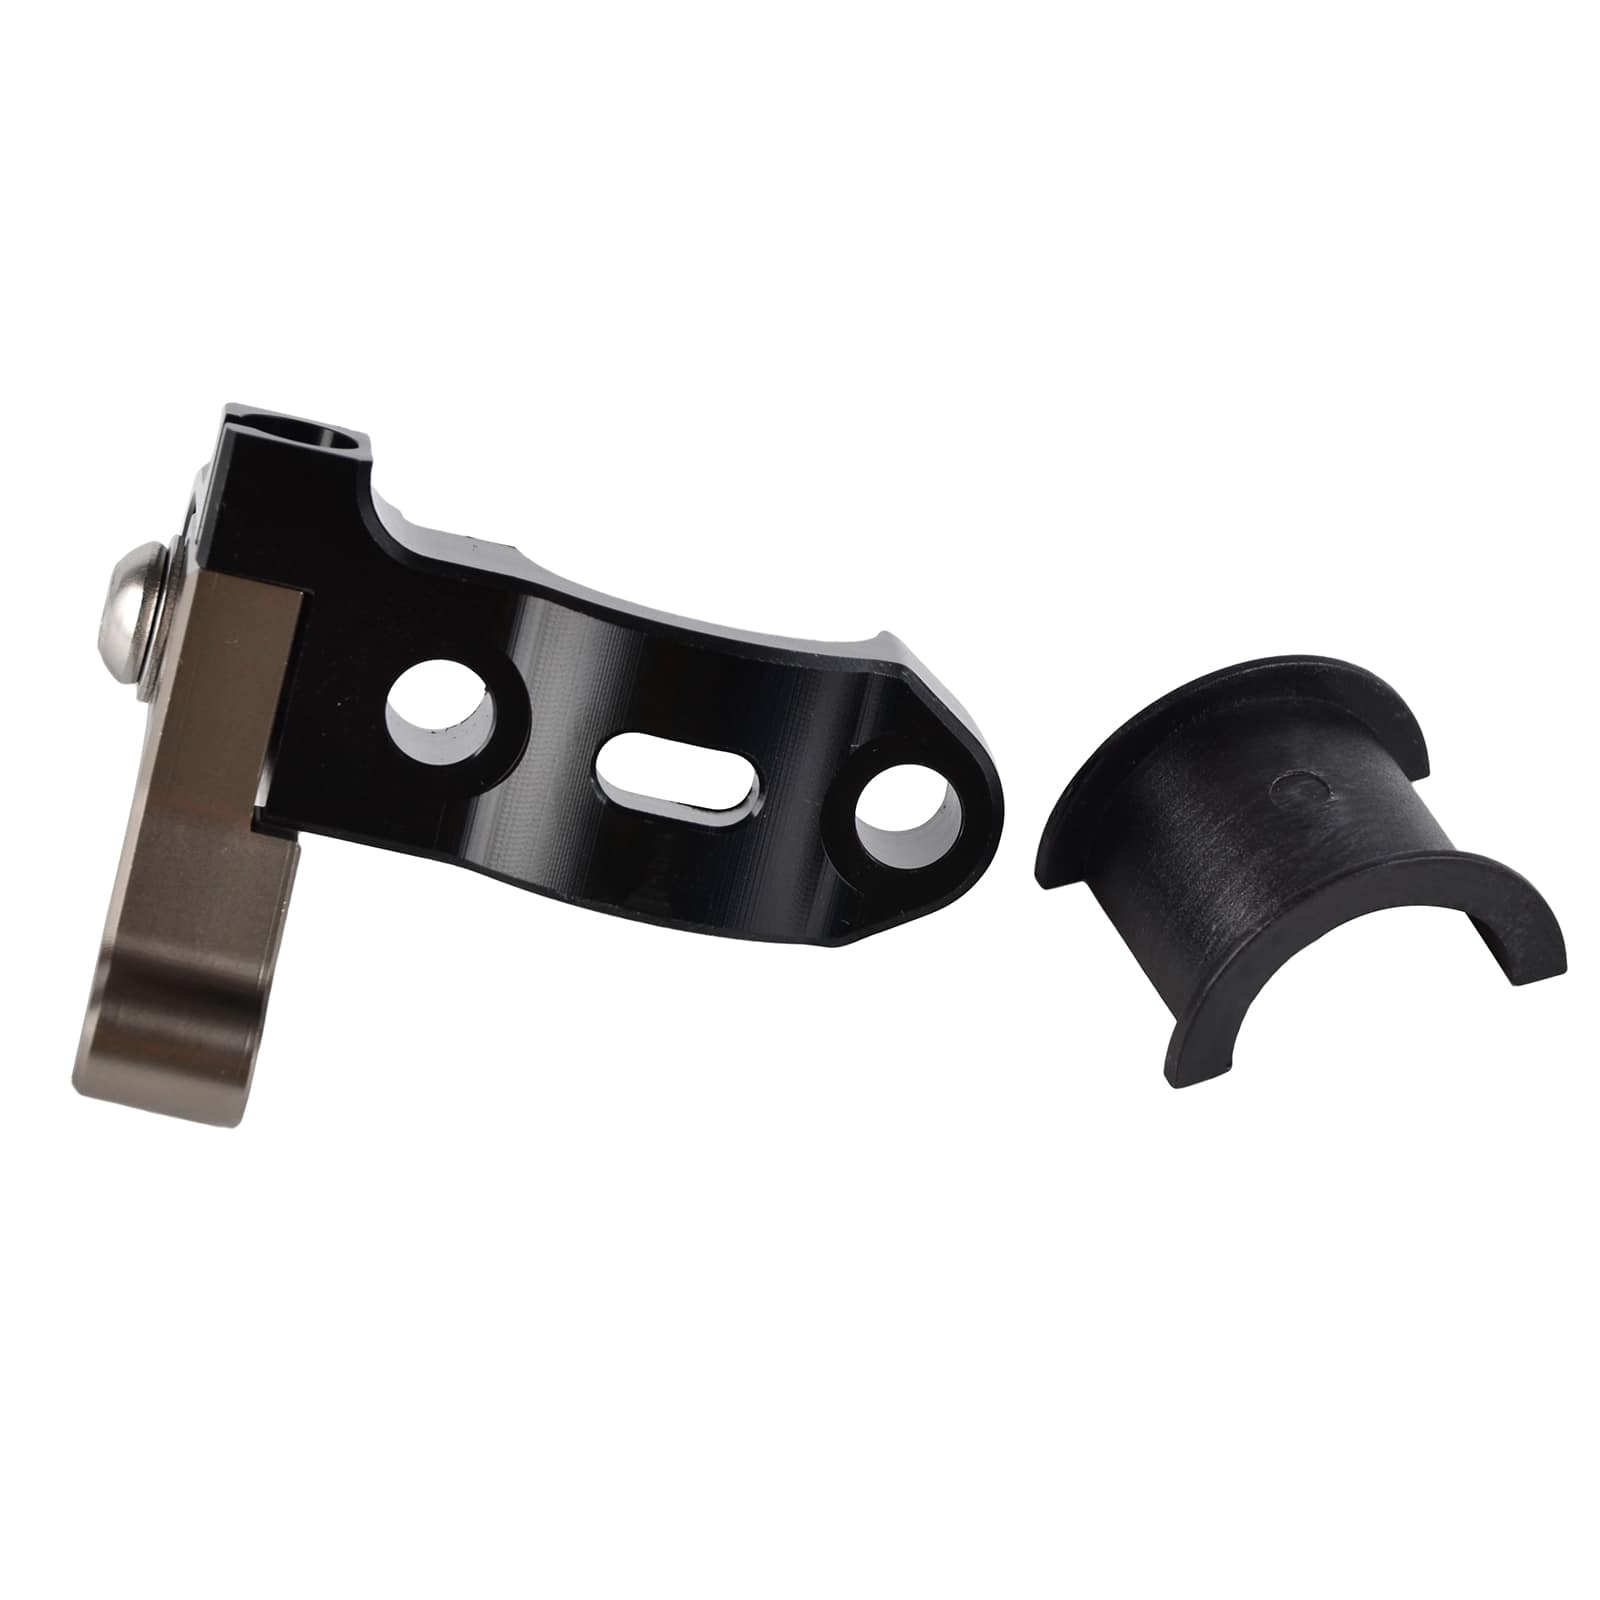 Rotating Bar Clamp Hot Start Lever For Brake and Clutch